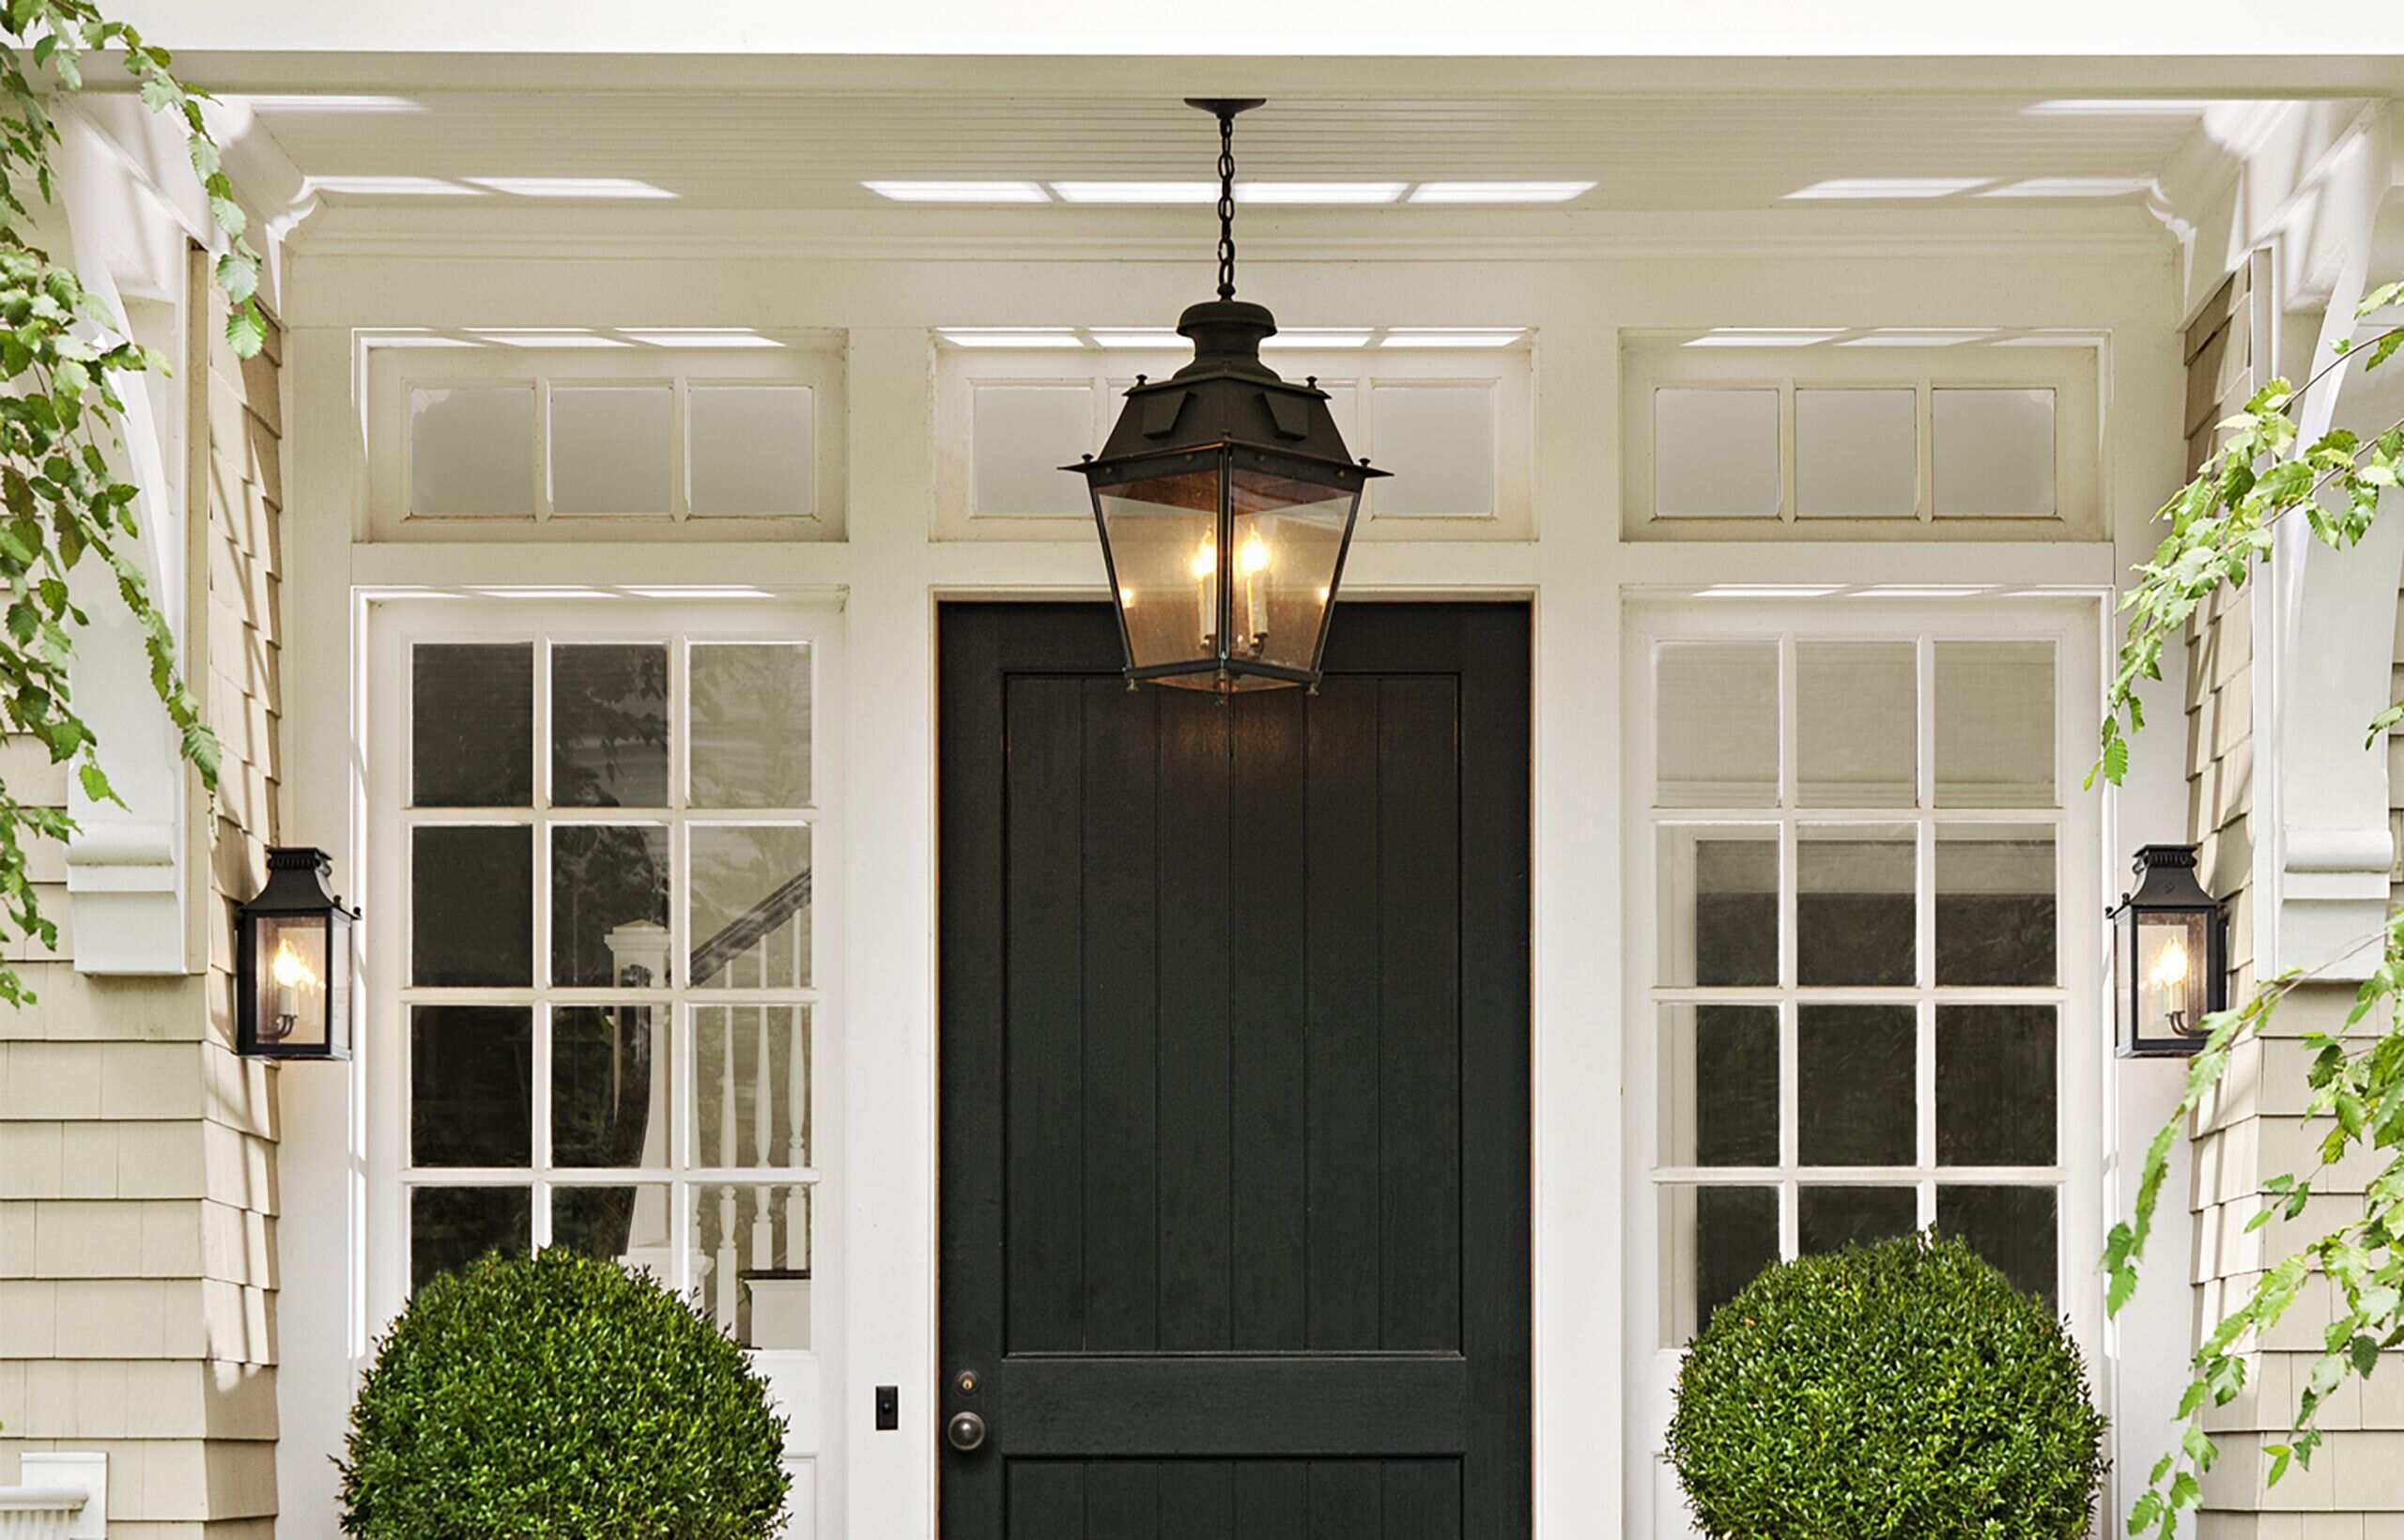 How To Hang Lights On Front Porch